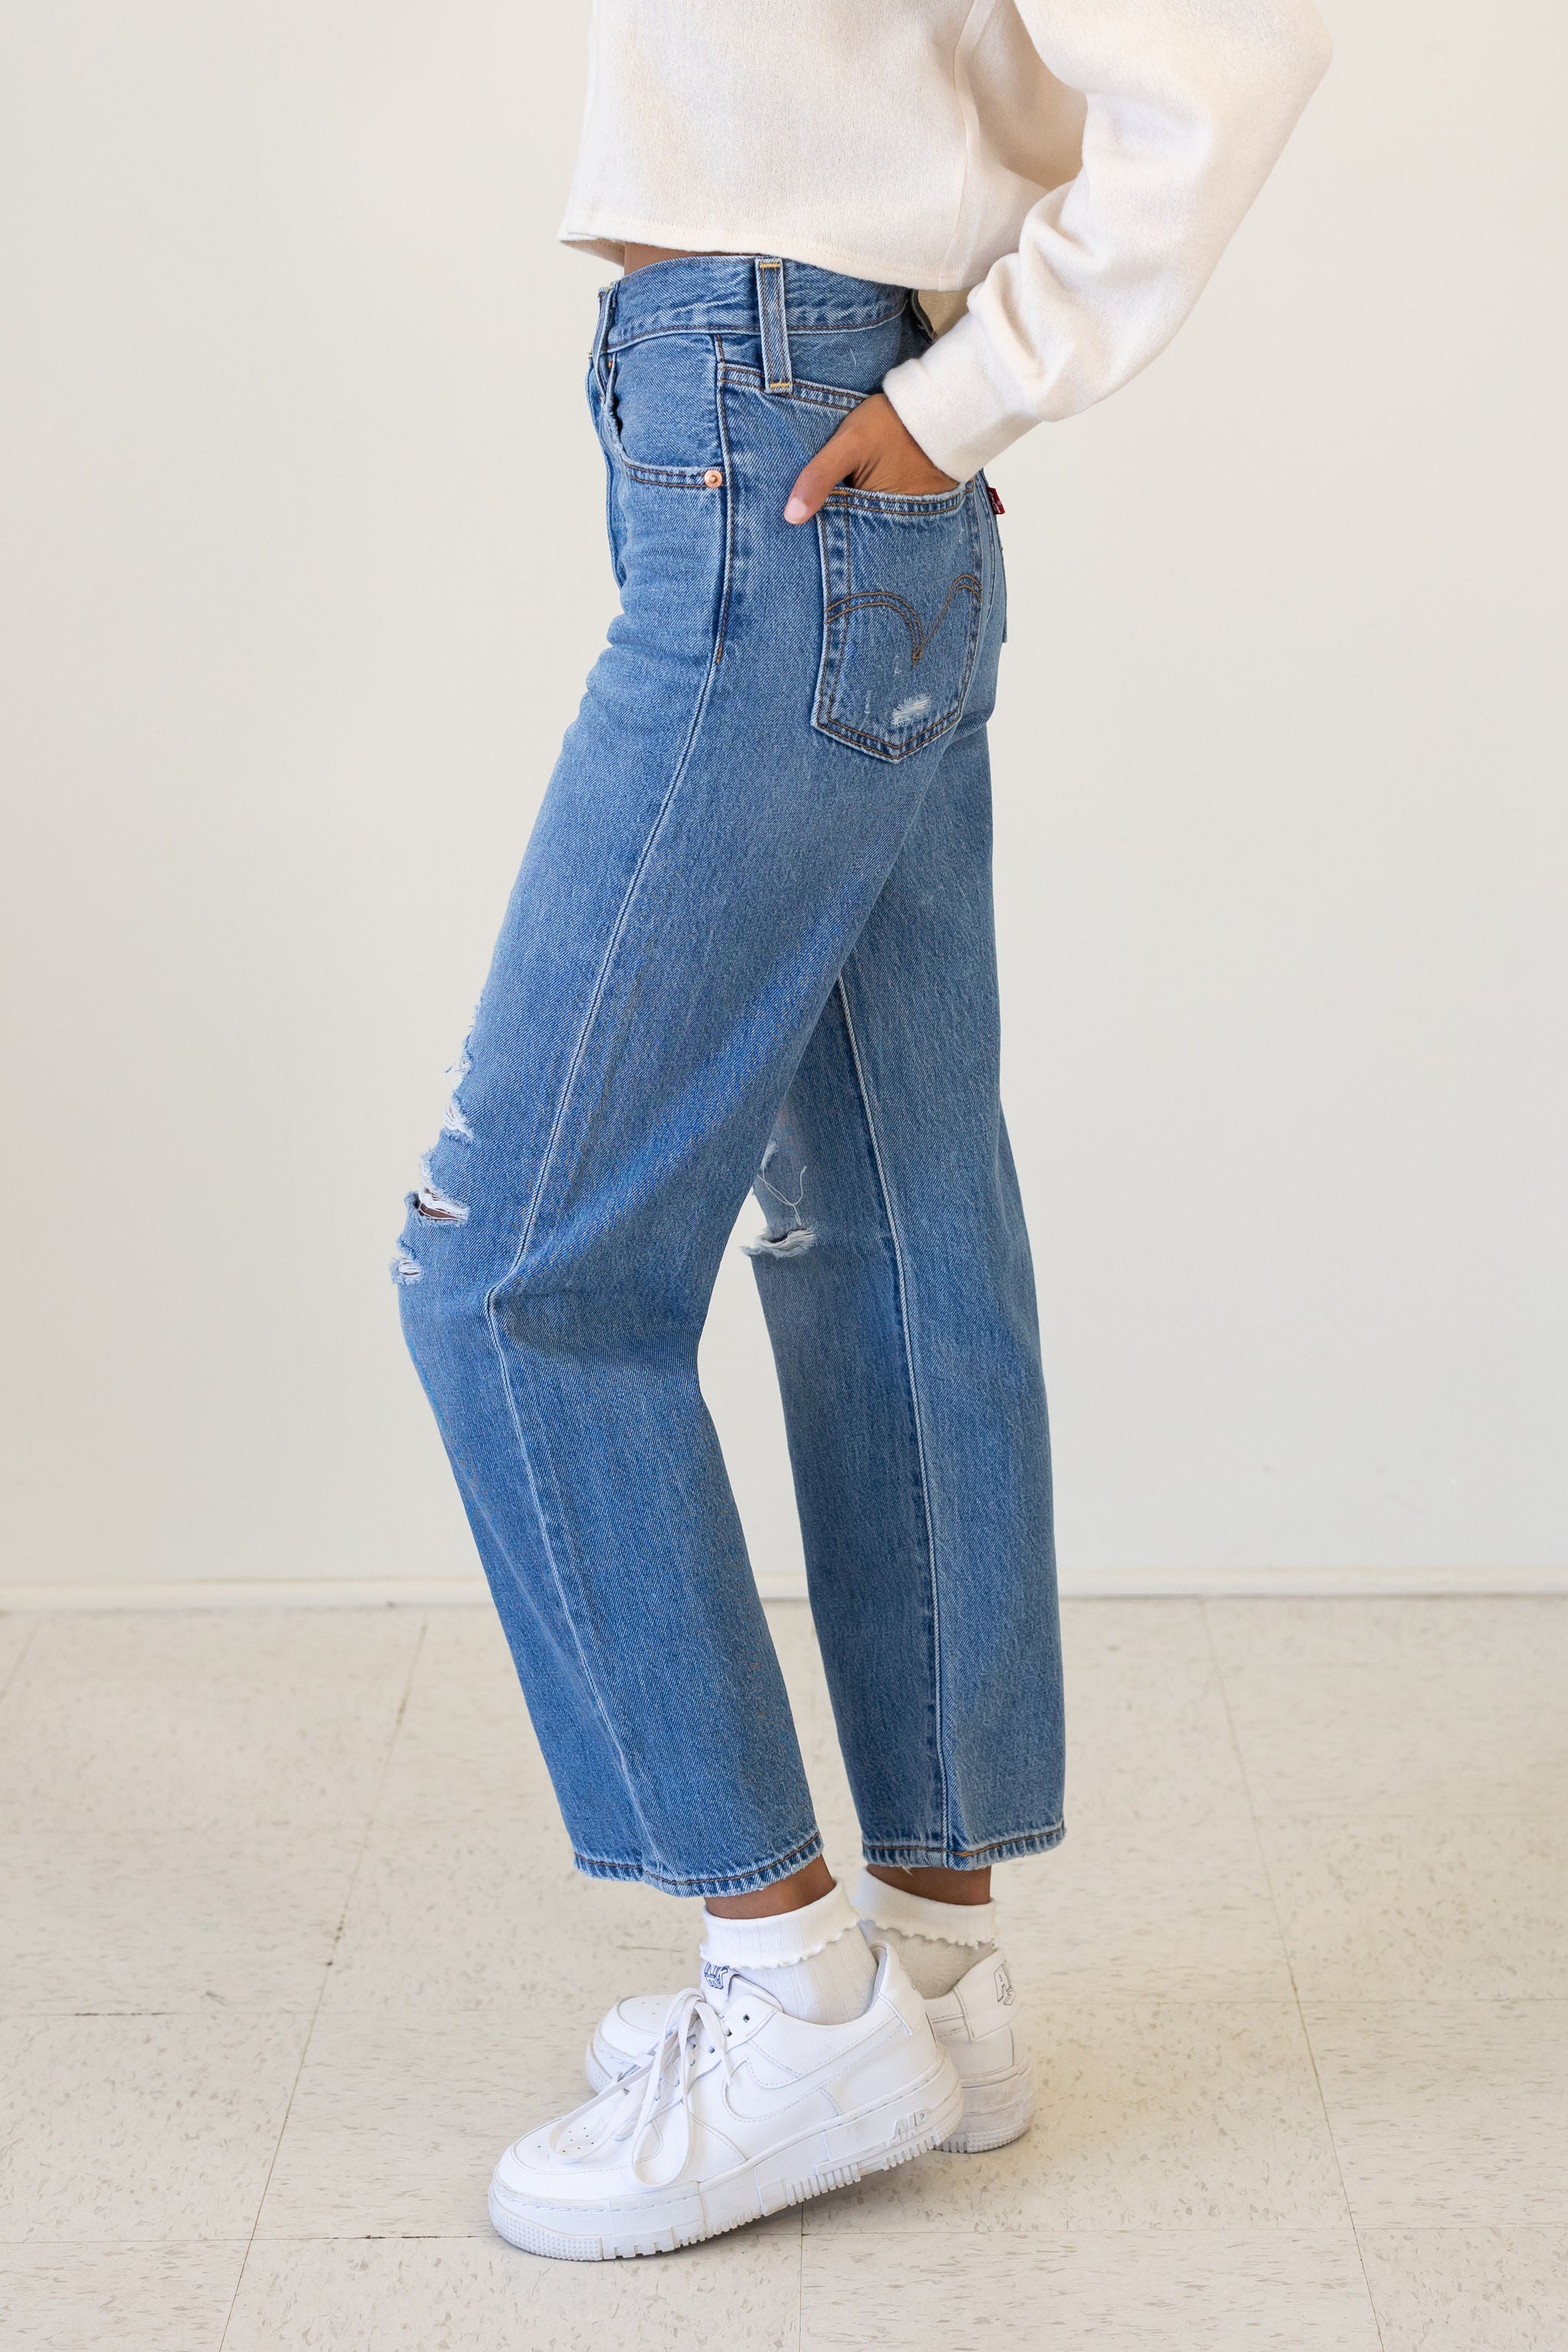 Ribcage Straight Ankle Jeans by Levi's